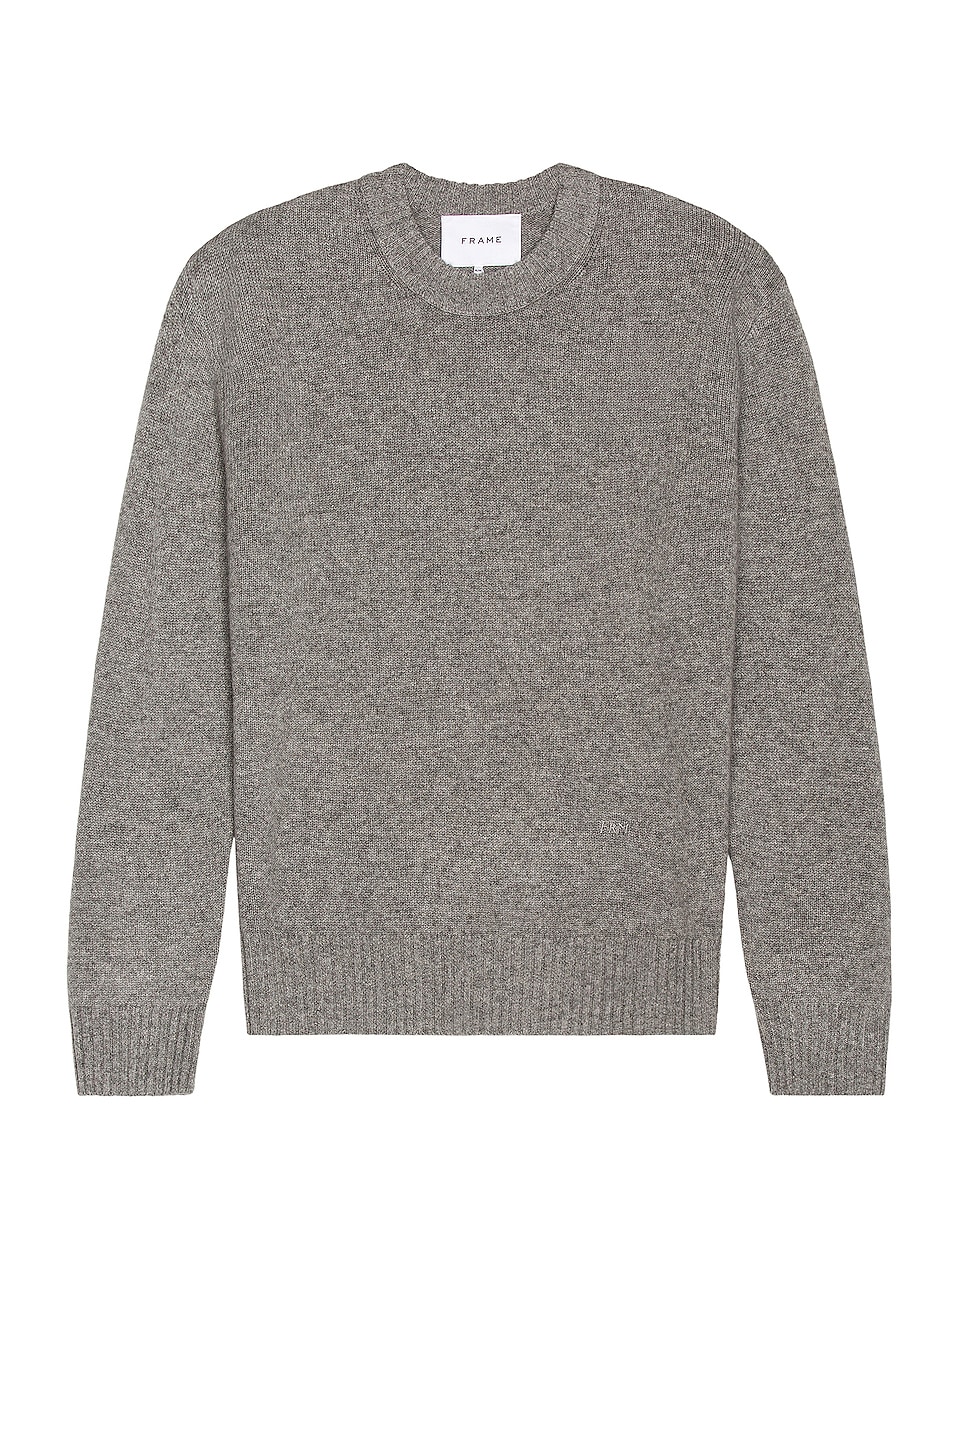 FRAME The Crew Neck Cashmere Sweater in Gris | REVOLVE